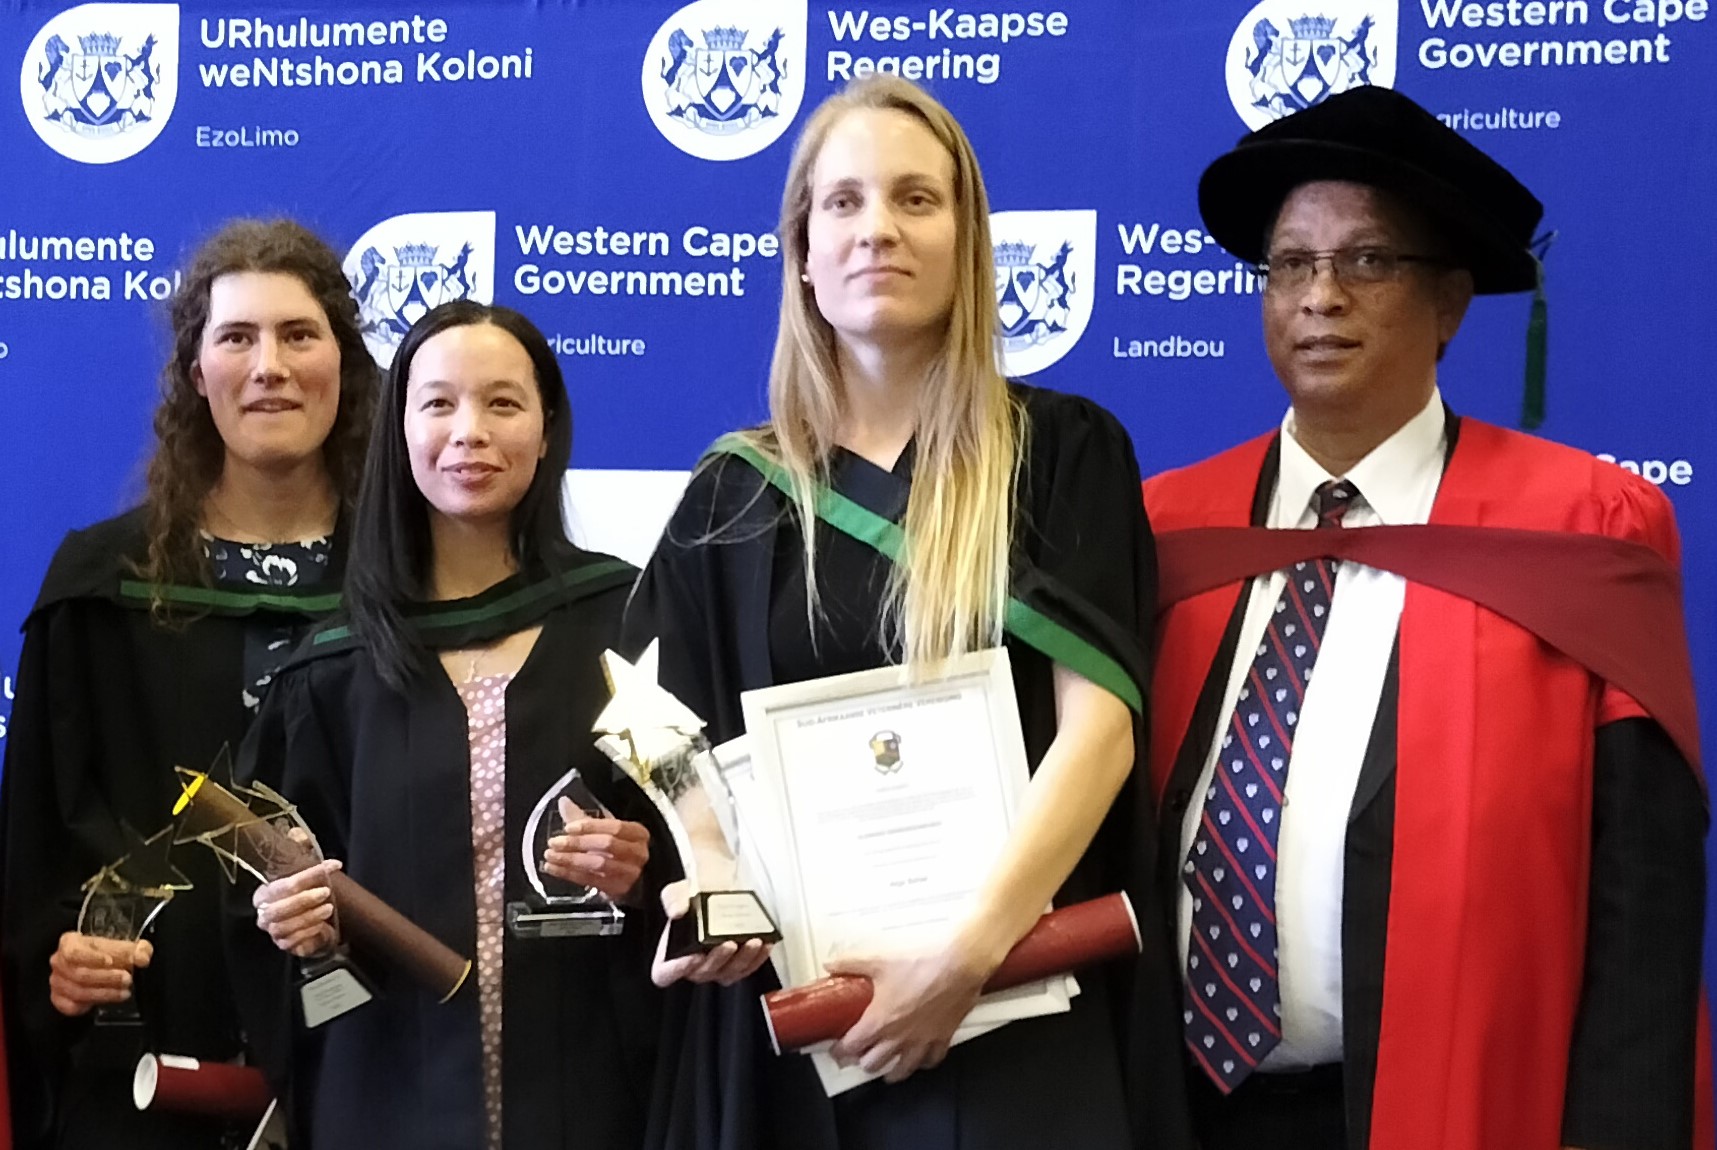 Andrea Caetano, Miche' Maree and Anja Kotze with Dr Meyer